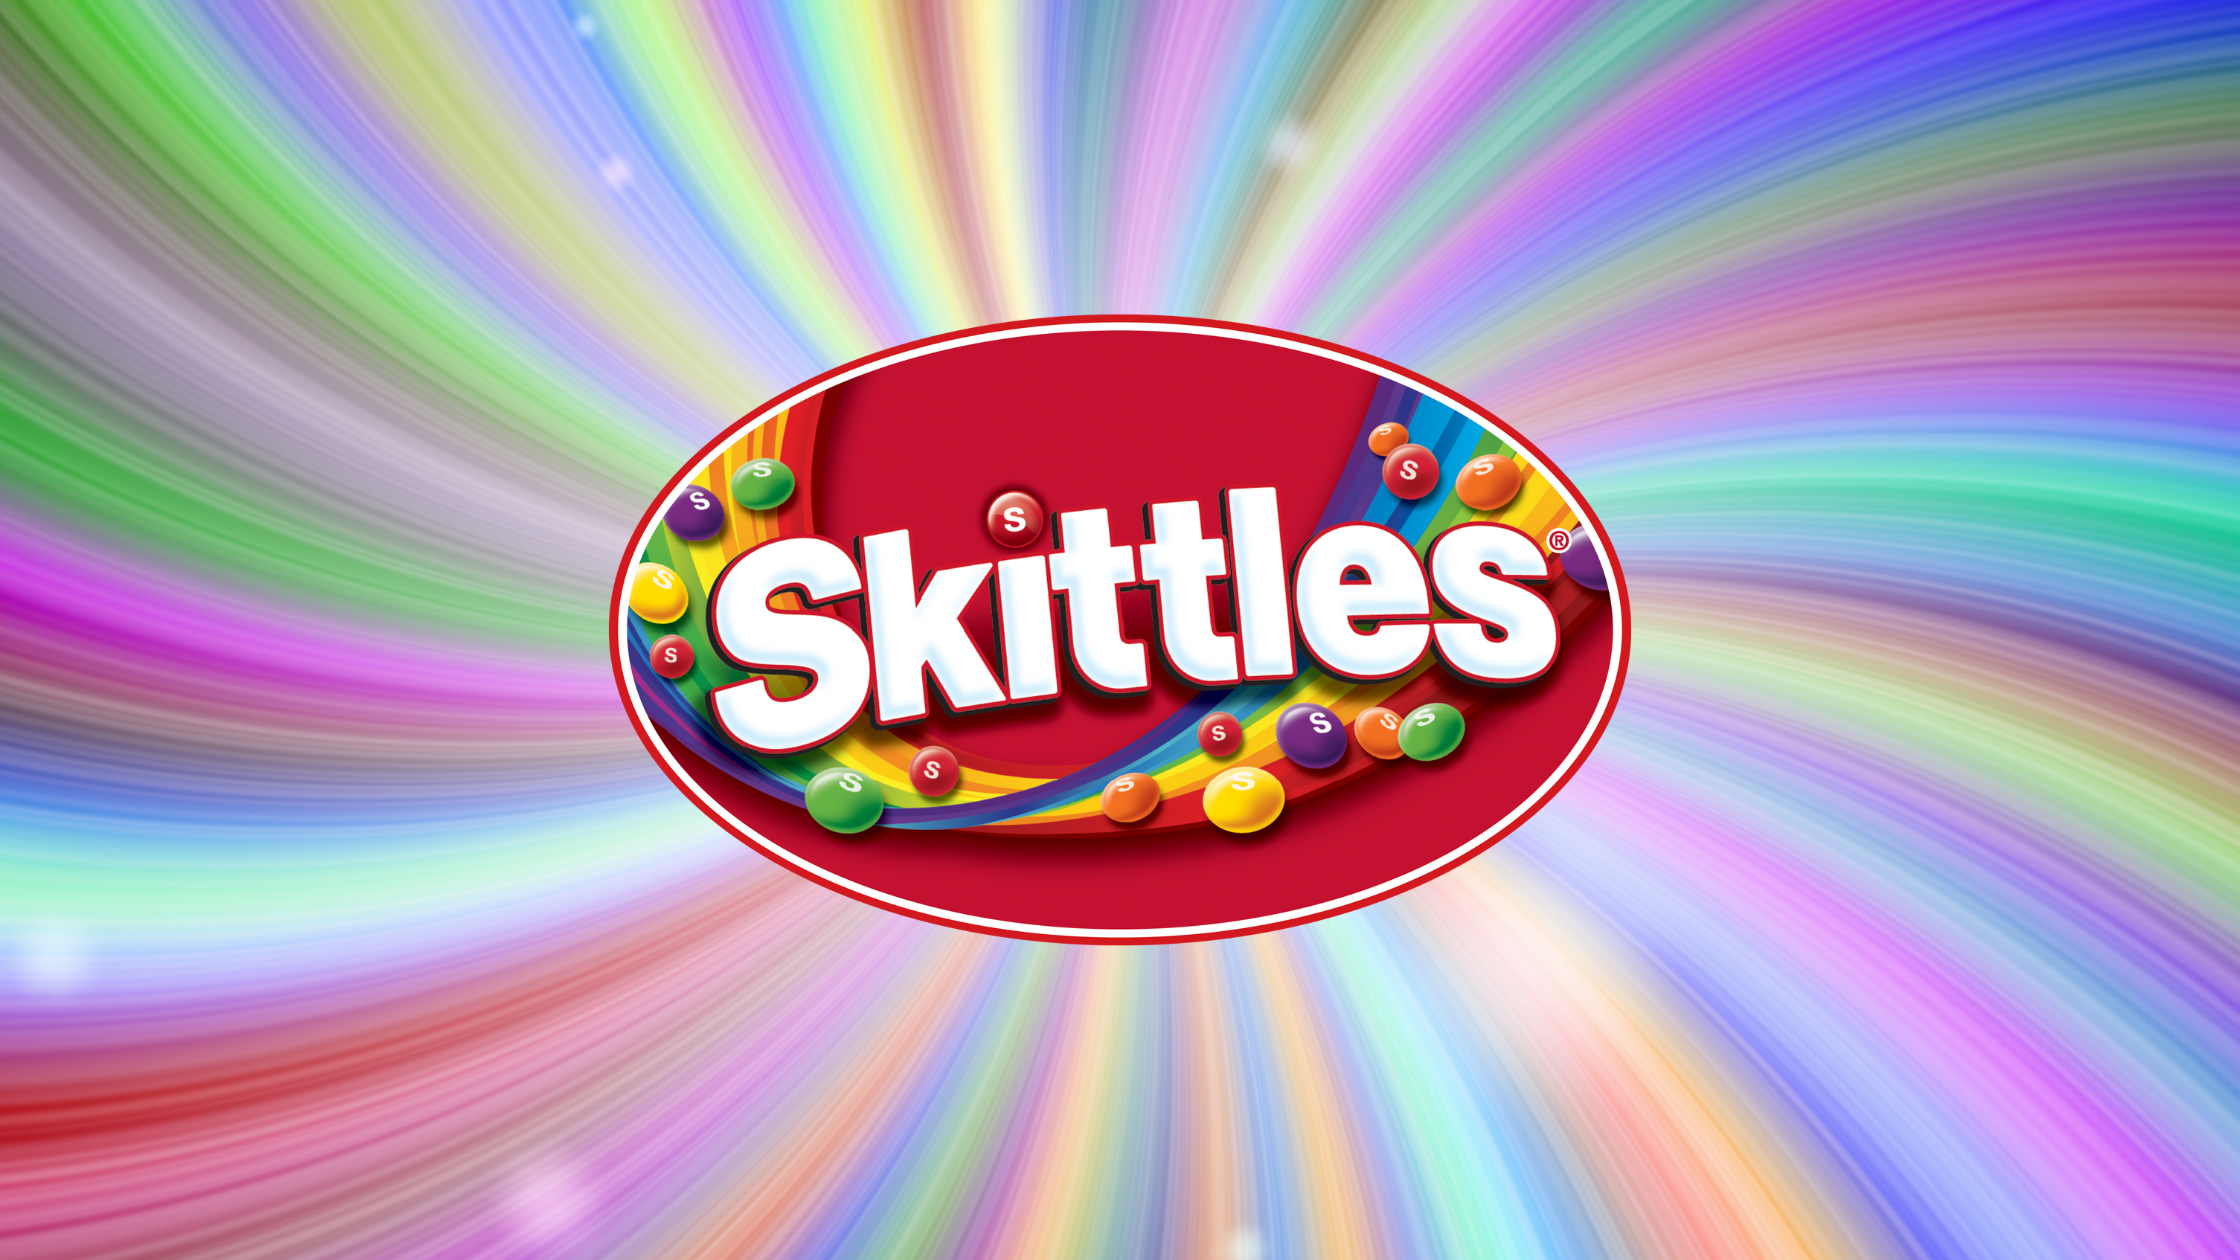 Our Love And Fascination With Skittles